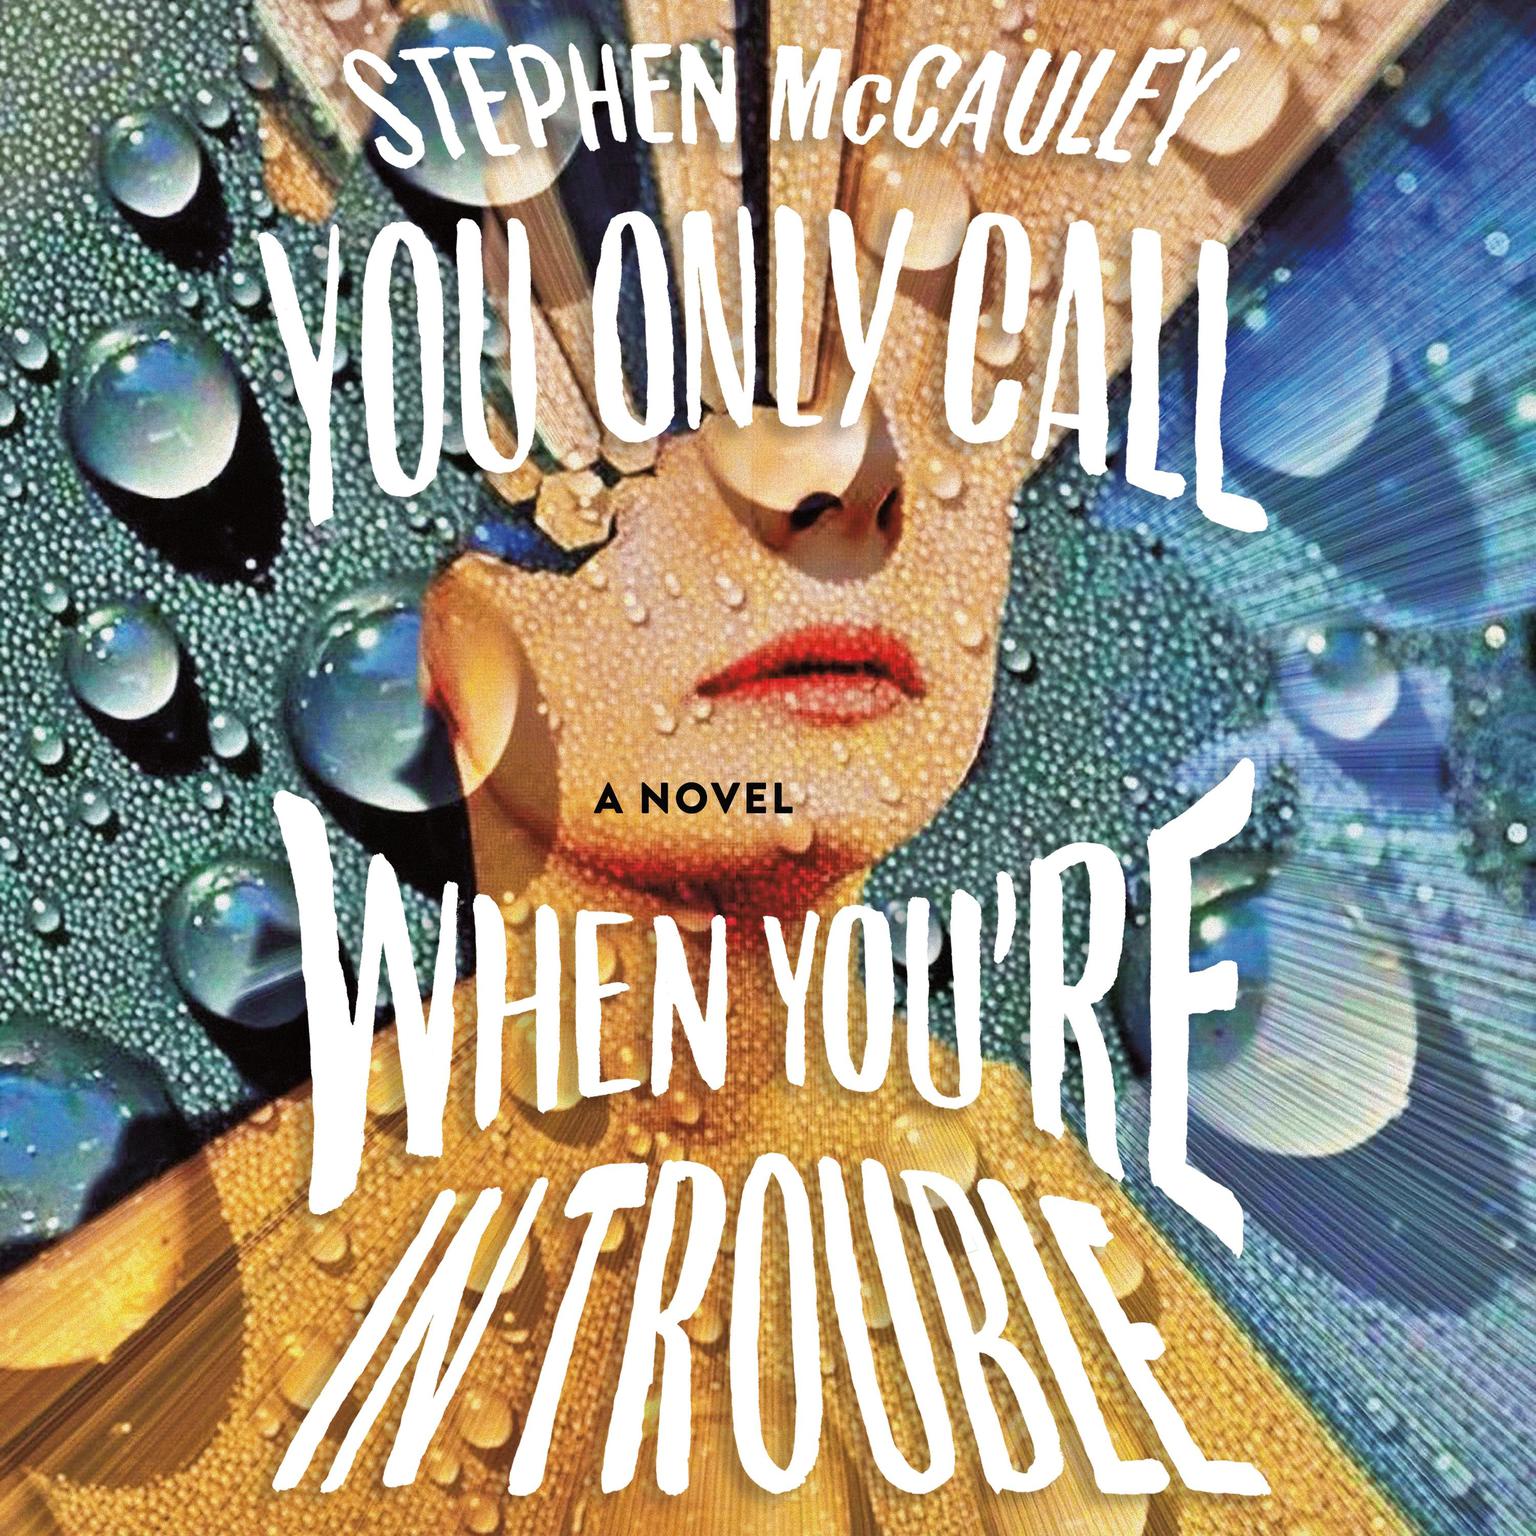 You Only Call When Youre in Trouble: A Novel Audiobook, by Stephen McCauley